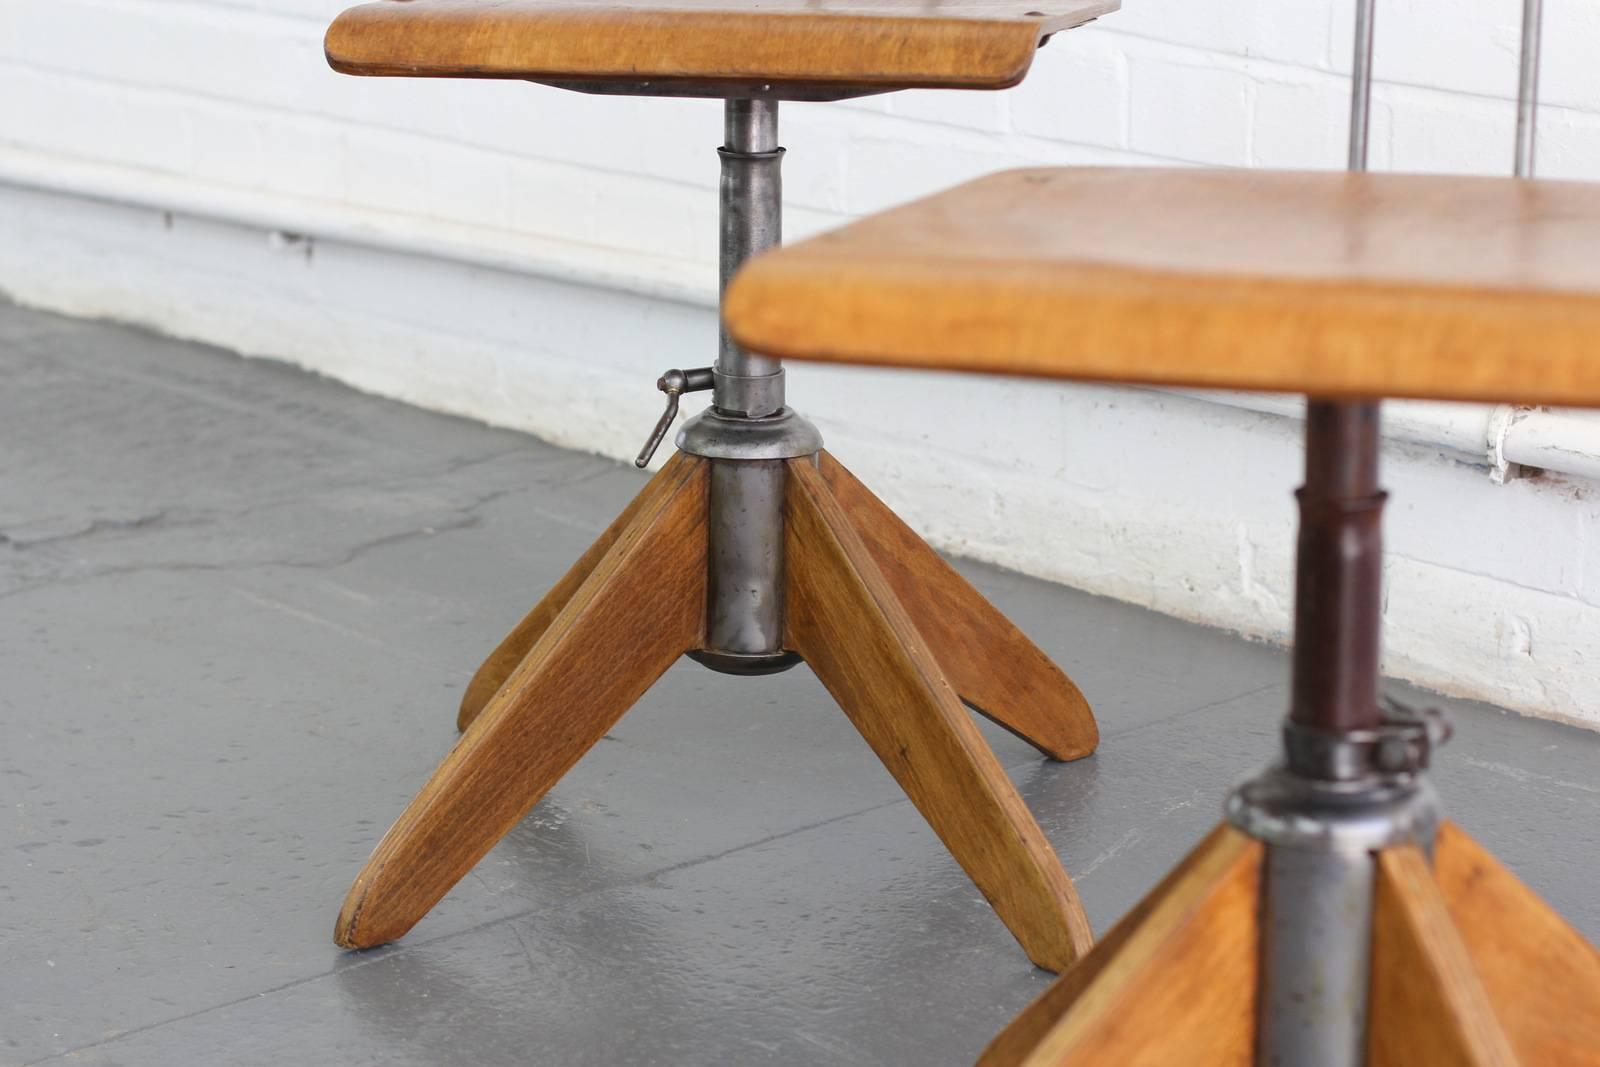 German Industrial Work Stools by Robert Wagner for Rowac, circa 1940s